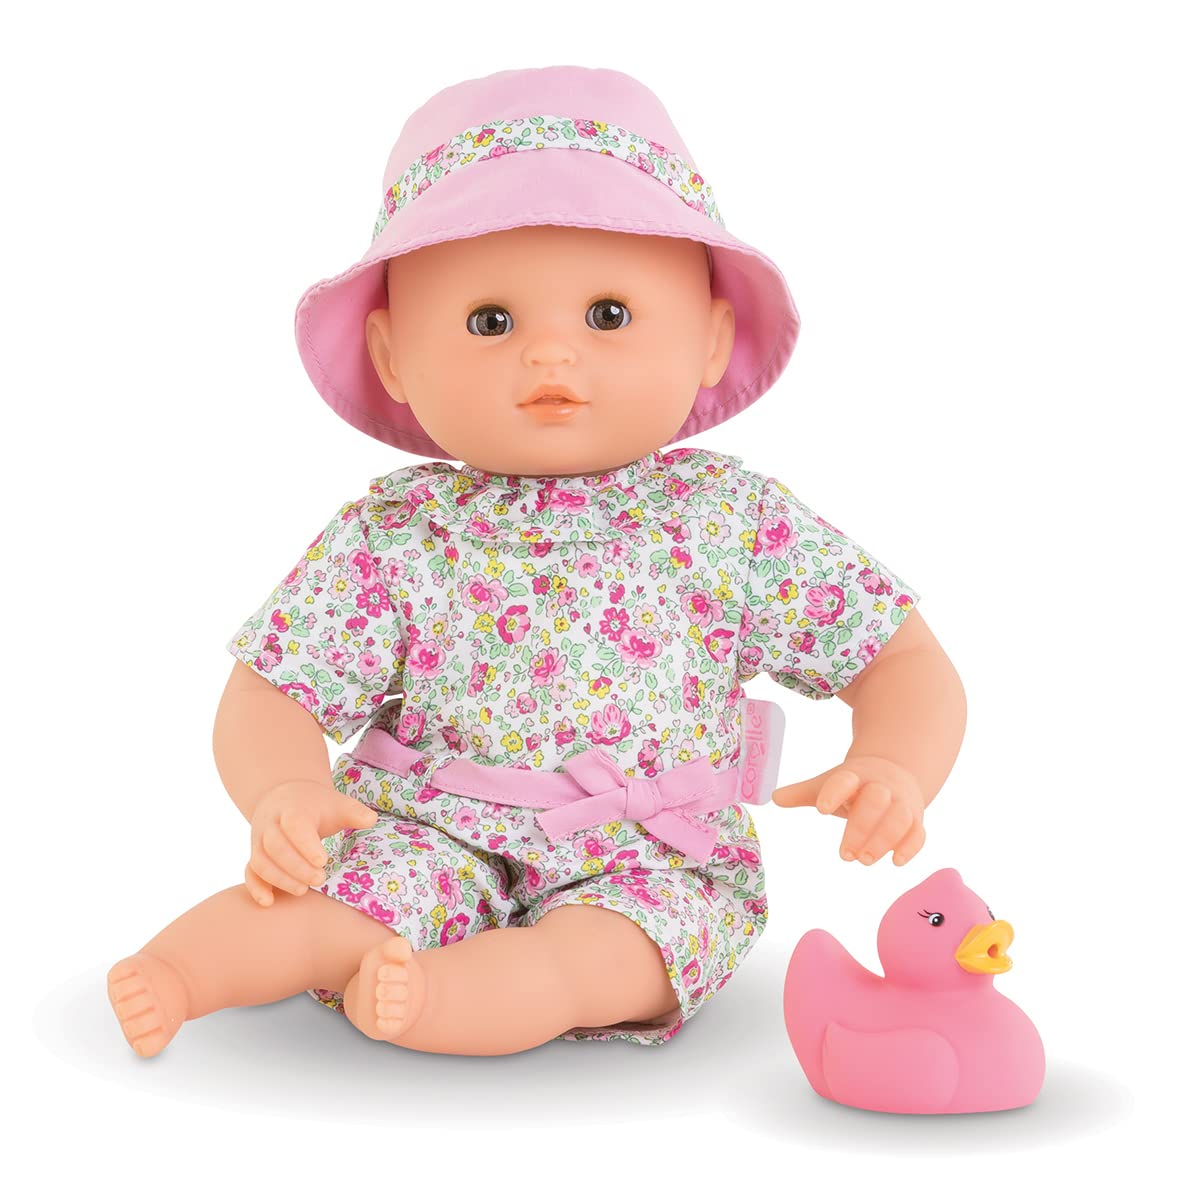 Ma Premiere Poupee Bath Baby Coralie, Soft Body Bath Doll with Bath Toy, Sleeping Eyes, Vanilla Scent, Removable Dresses, 30 cm, from 18 Months